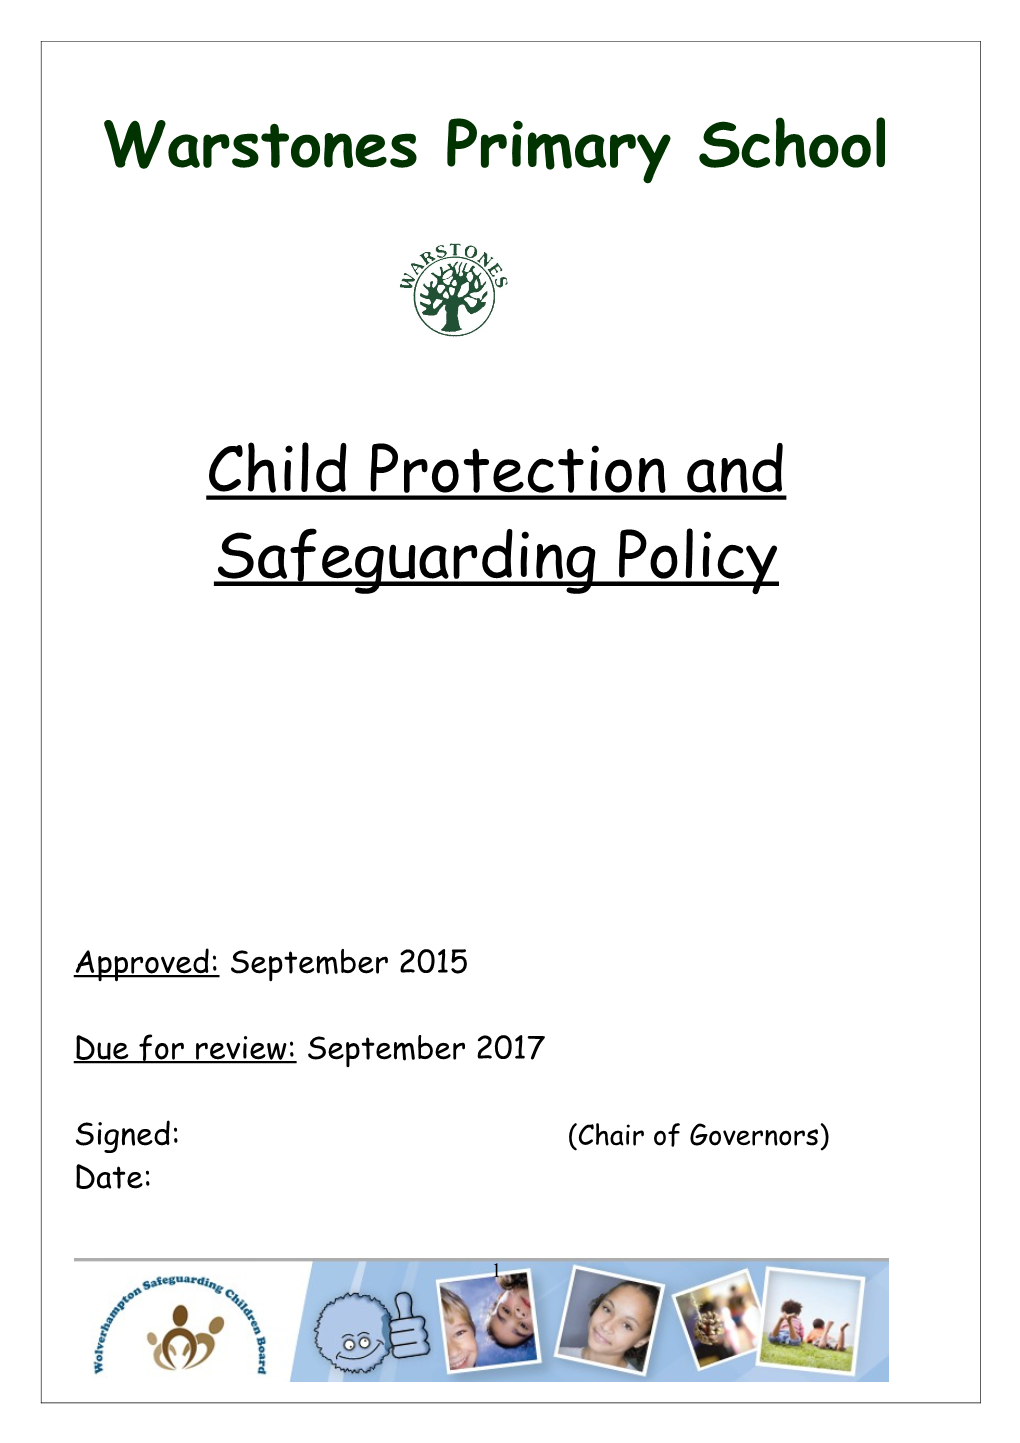 Warstones Child Protection and Safeguarding Policy